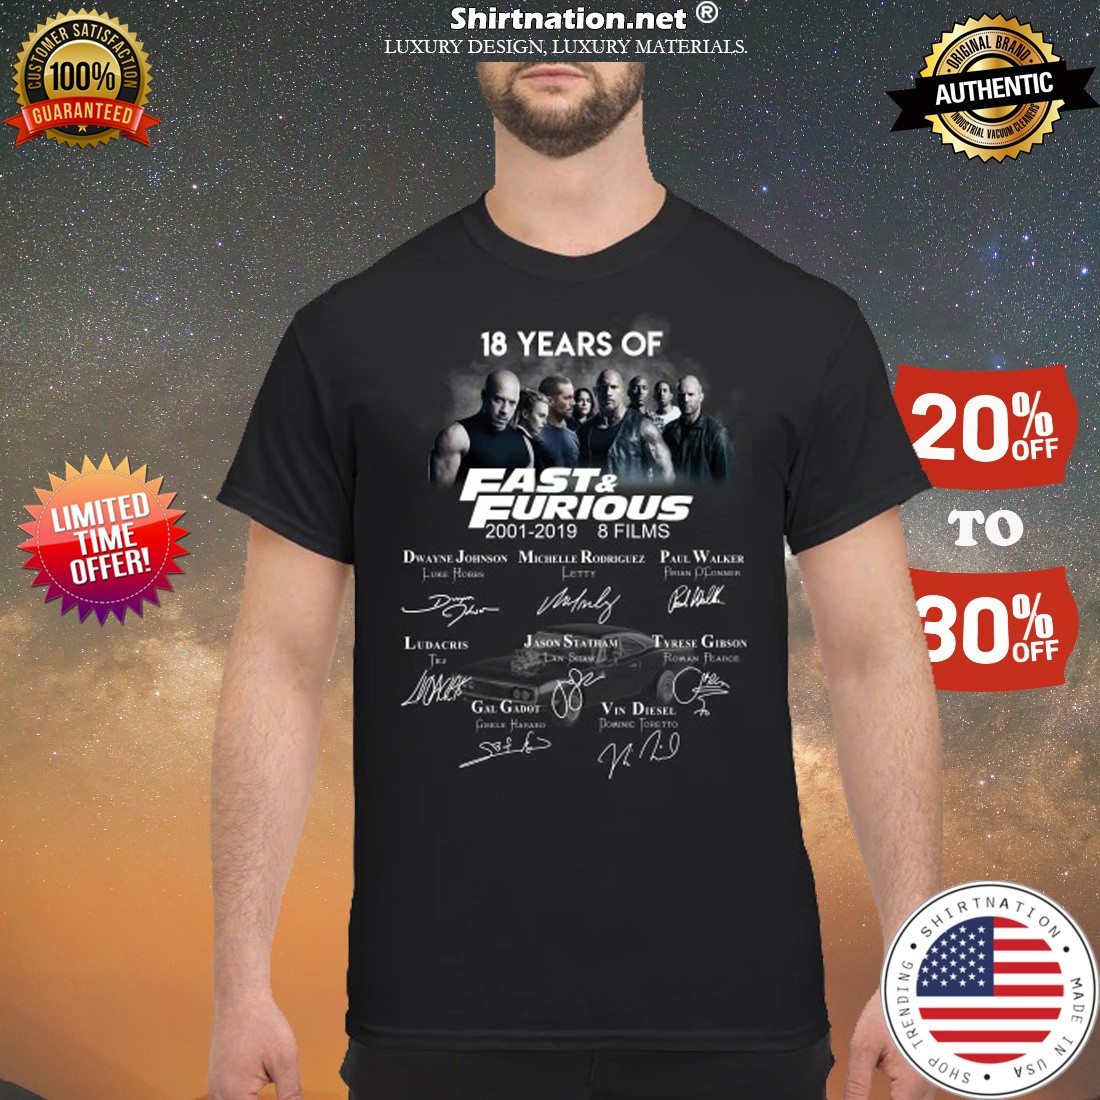 18 years of fast and furious 8 films shirt